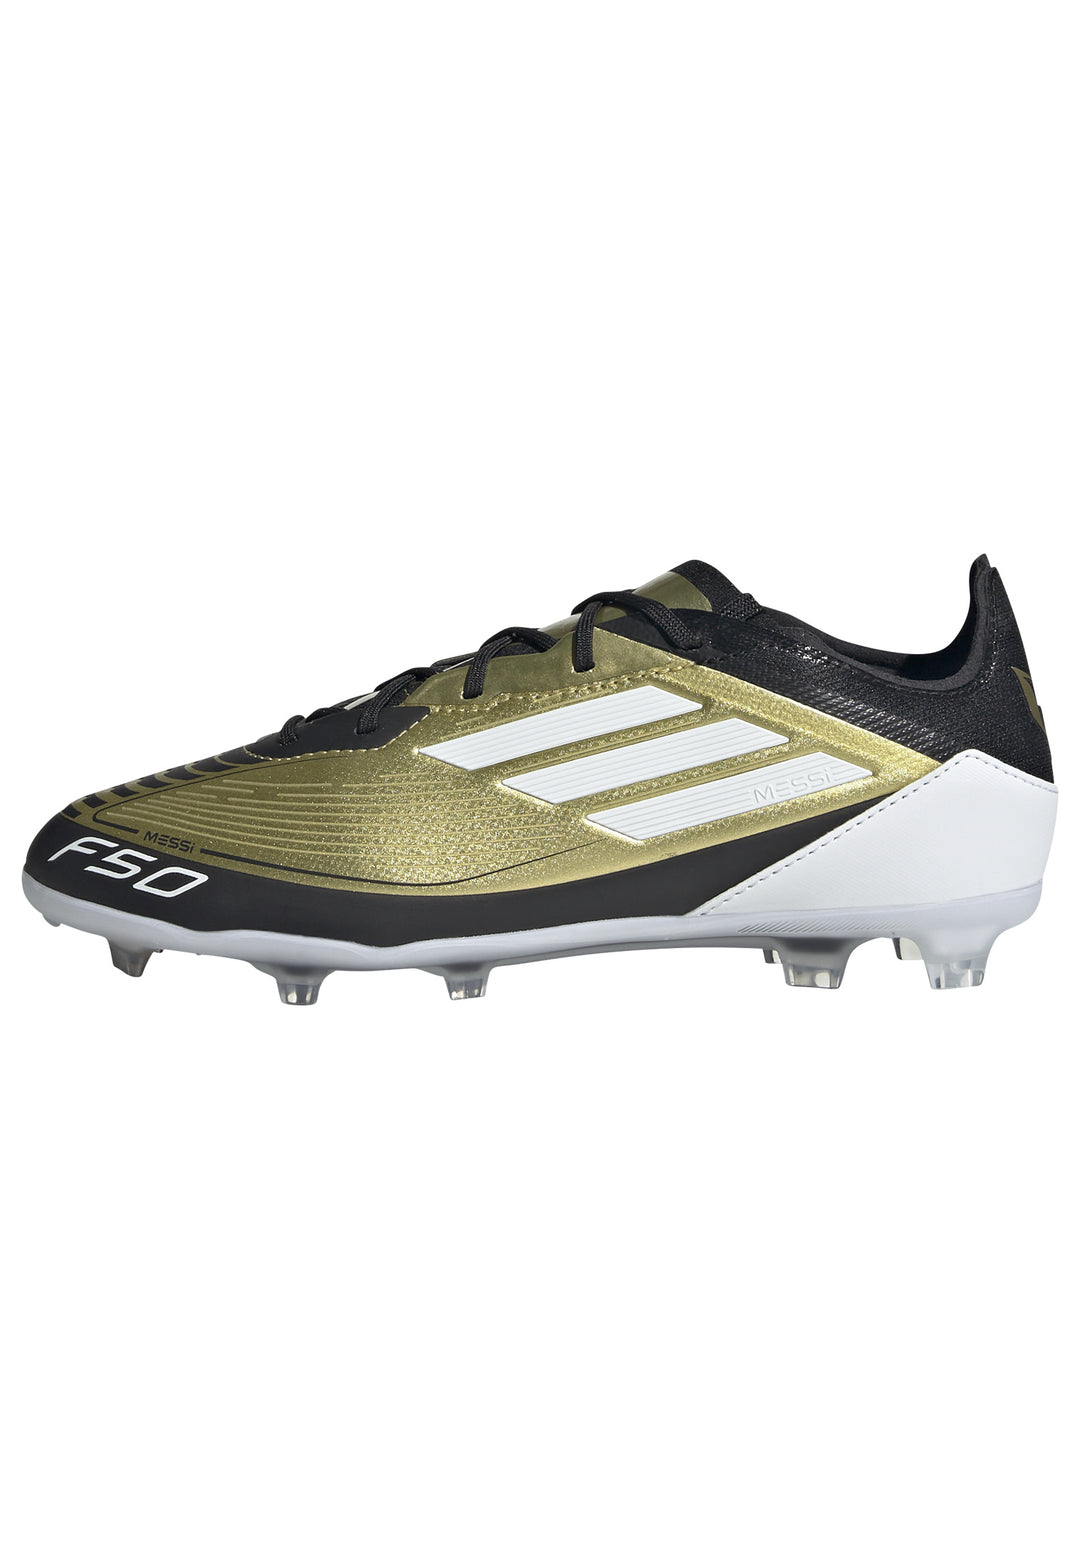 adidas F50 Pro FG Junior Messi Firm Ground Soccer Cleats